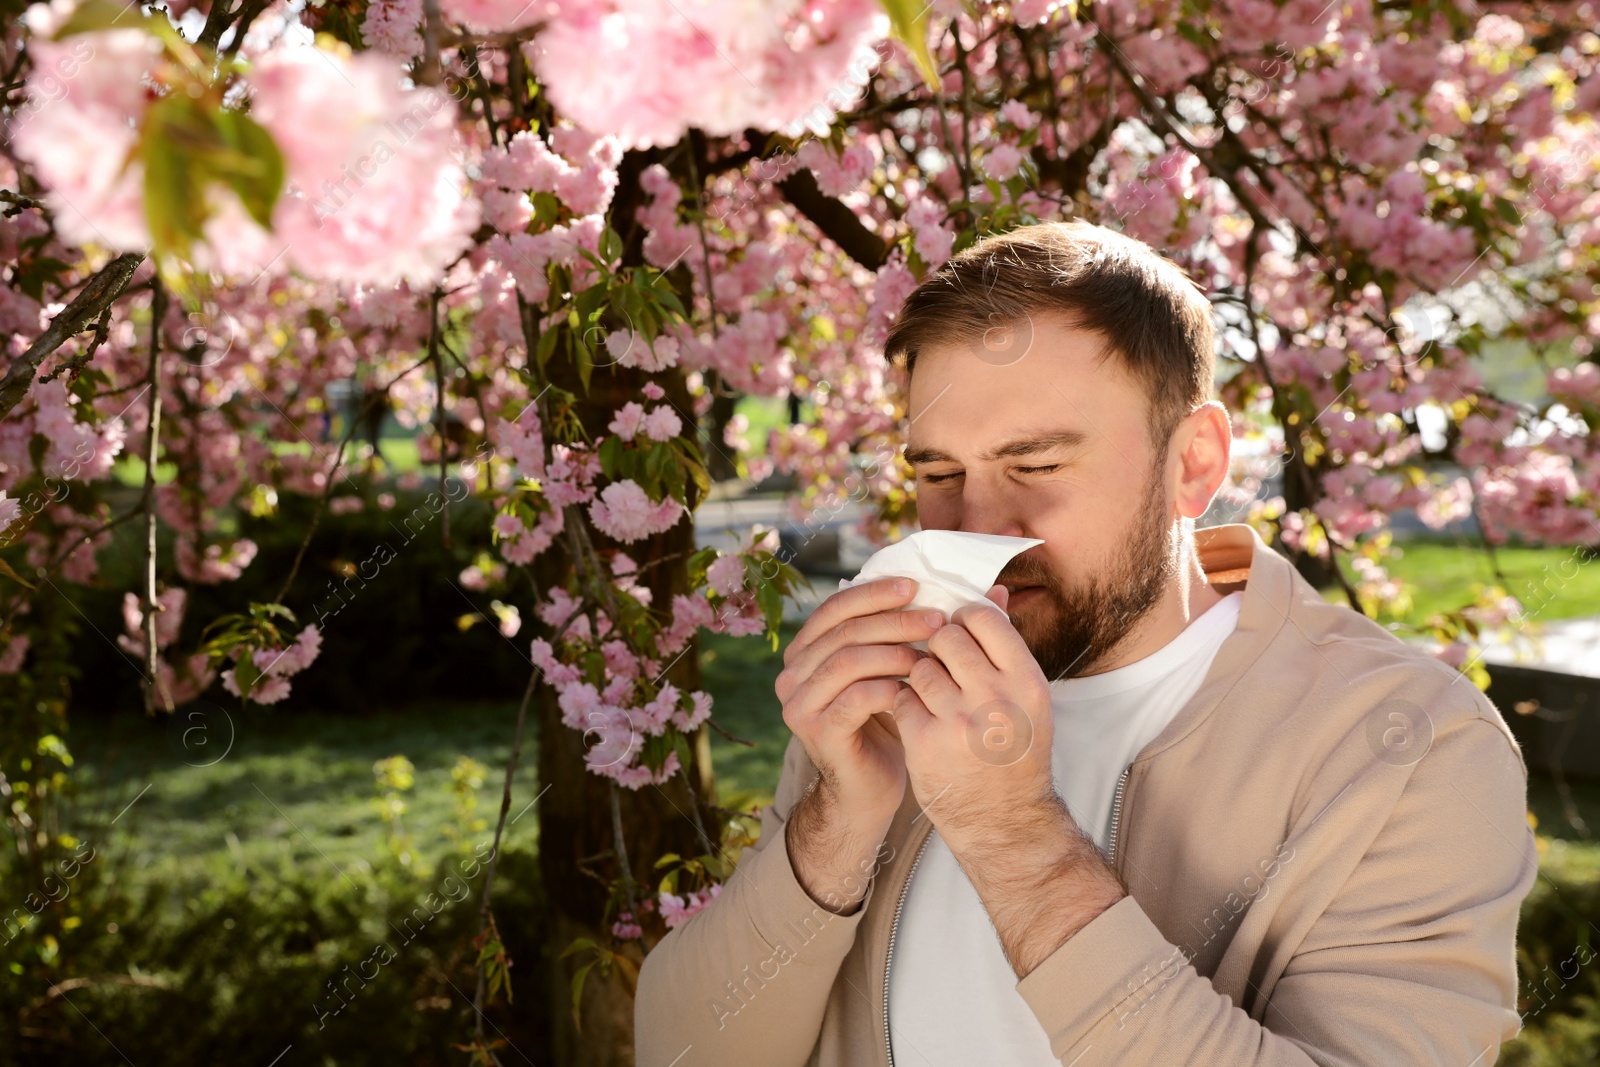 Photo of Man suffering from seasonal pollen allergy near blossoming tree outdoors